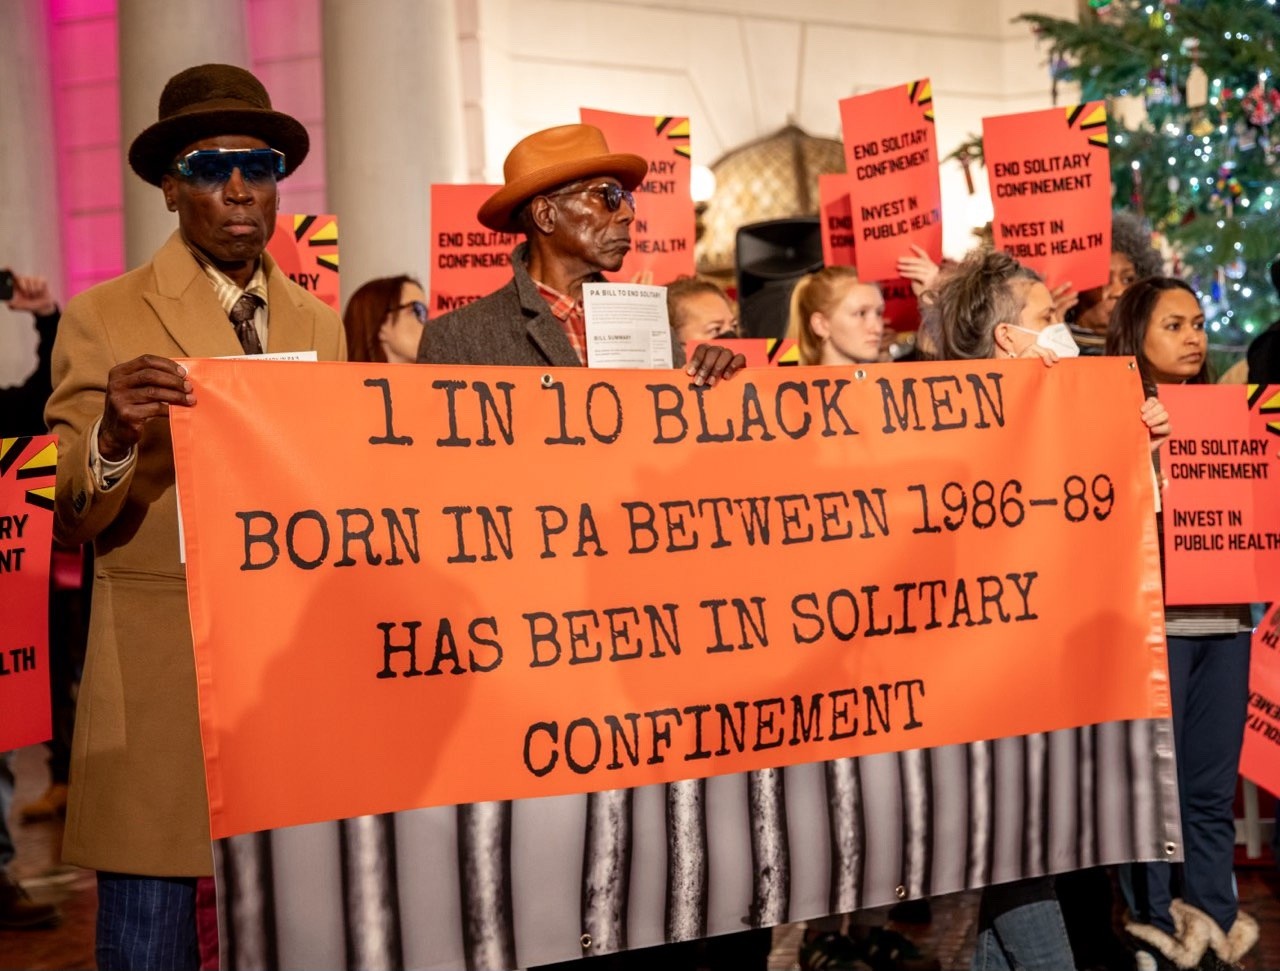 People hold sign stating, "1 in 10 Black men born in PA between 1986-89 has been in solitary confinement."